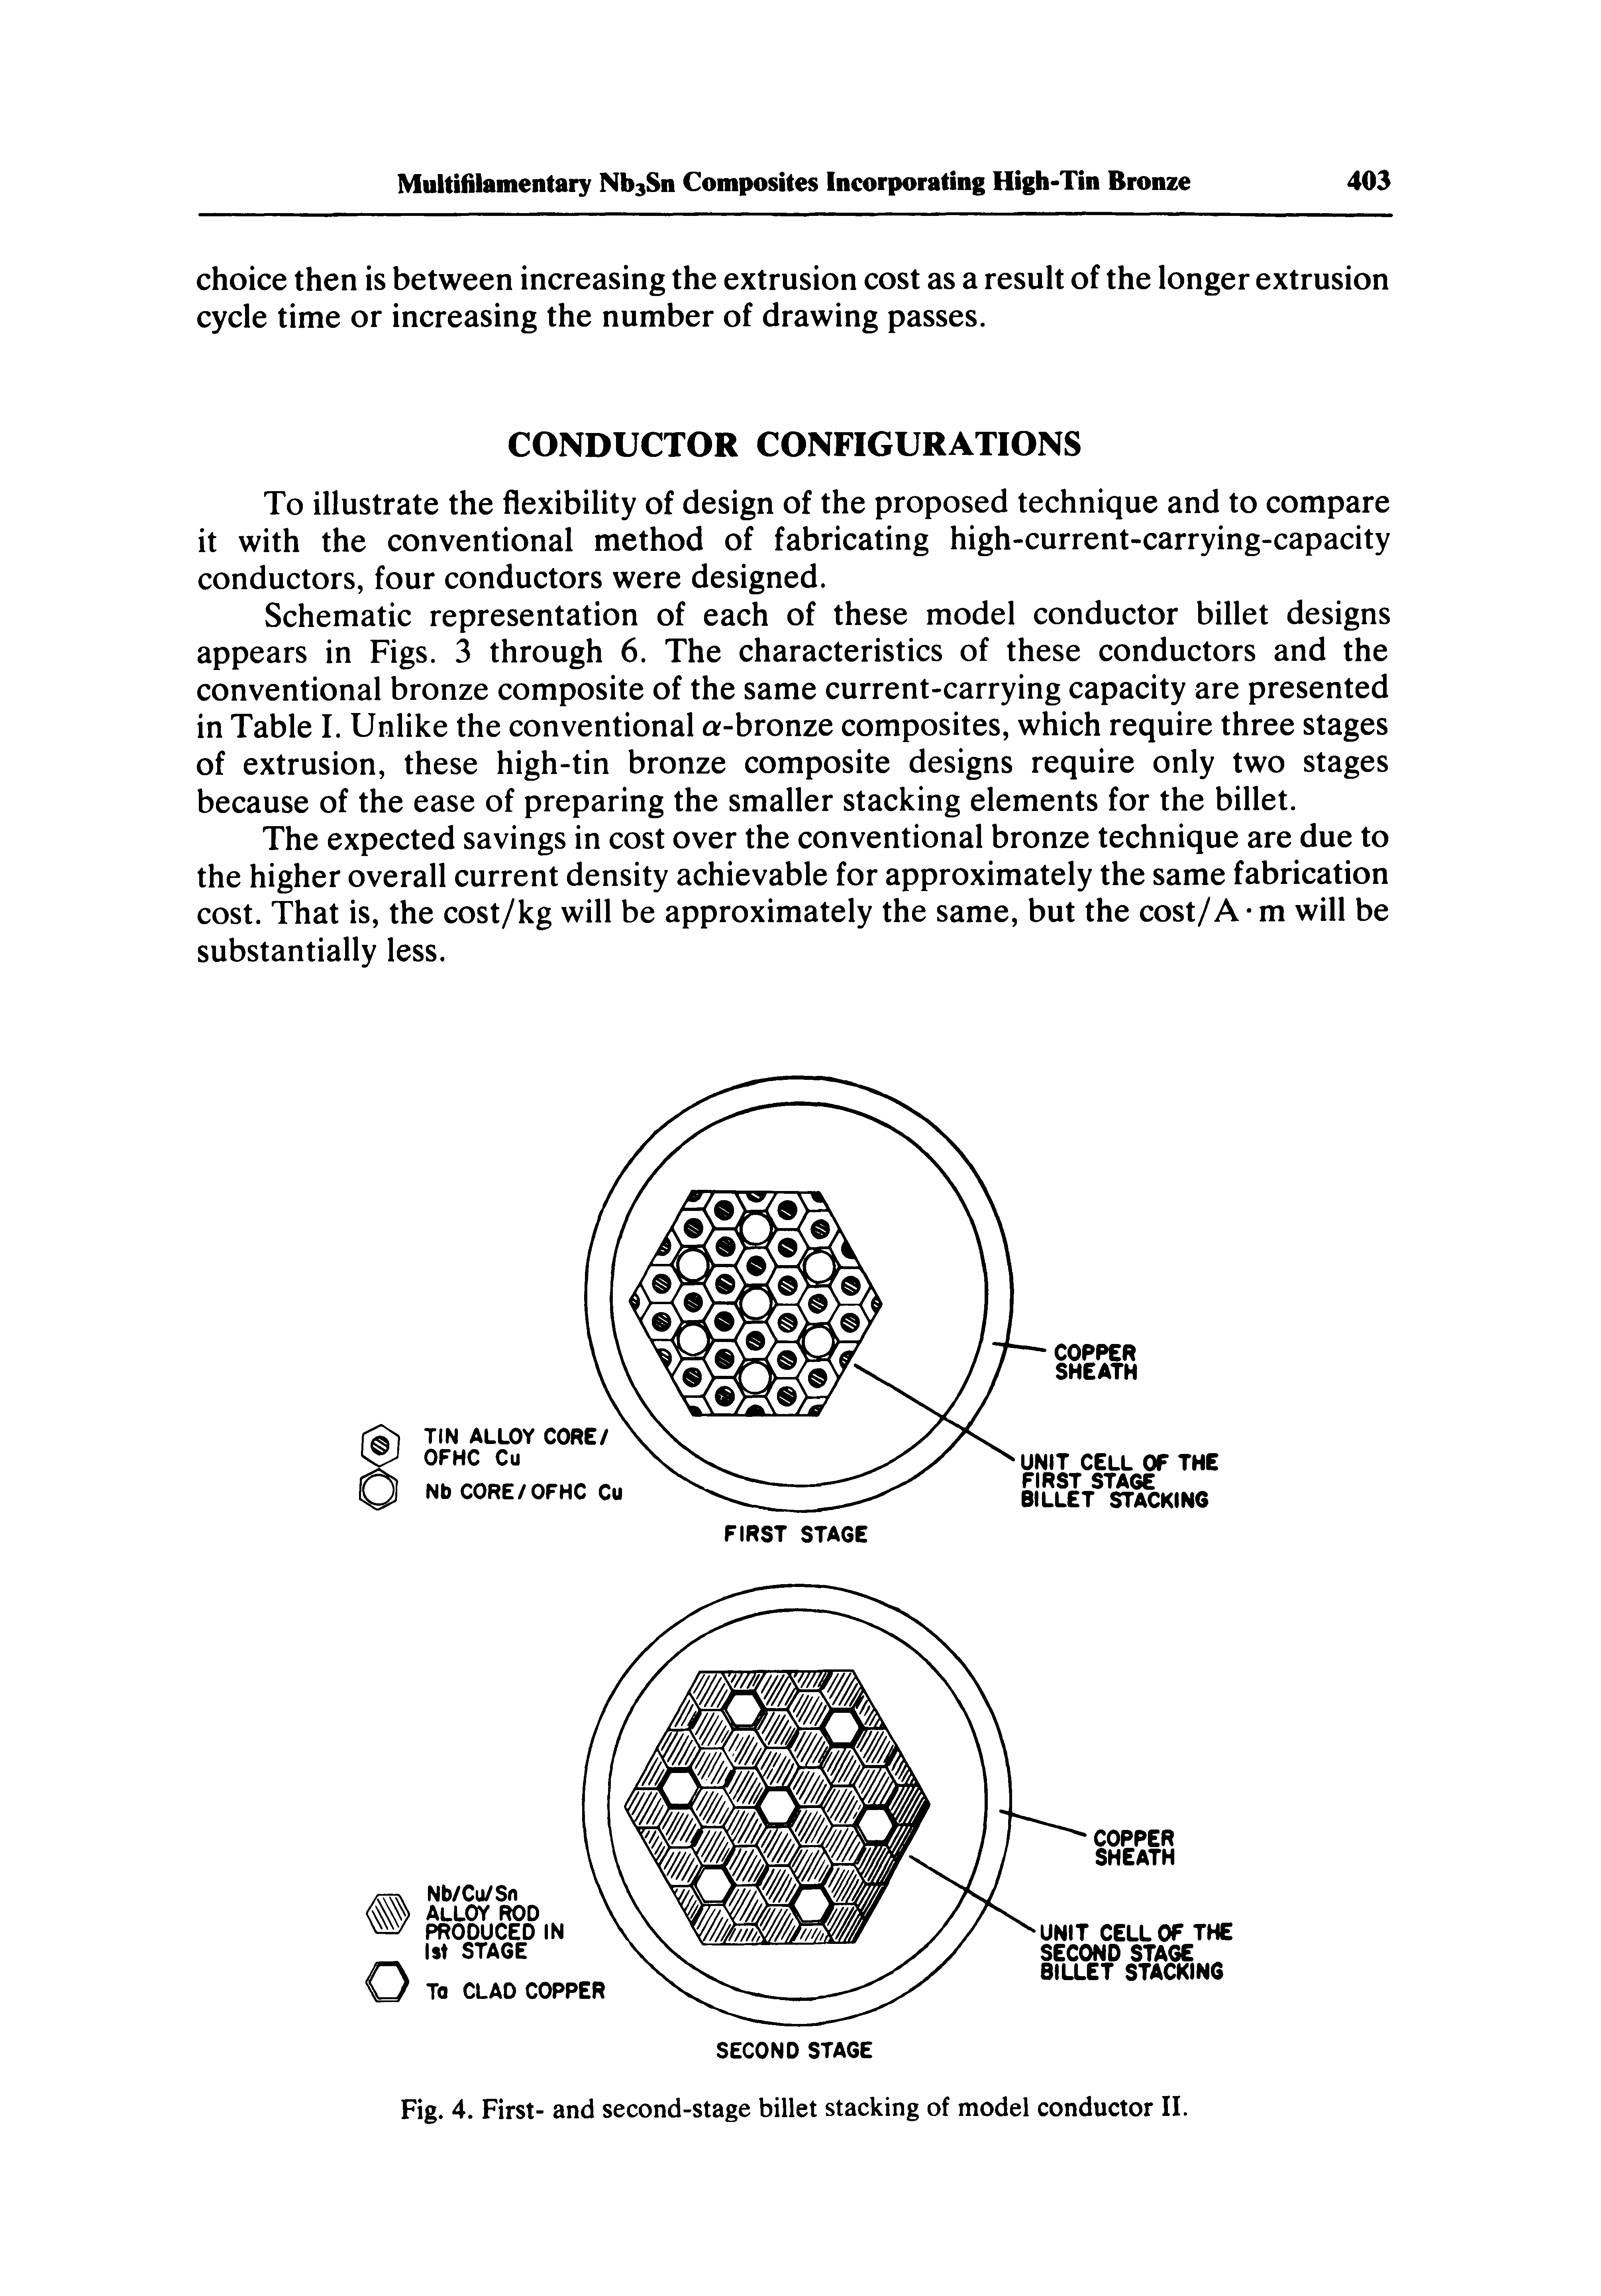 Schematic representation of each of these model conductor billet designs appears in Figs. 3 through 6. The characteristics of these conductors and the conventional bronze composite of the same current-carrying capacity are presented in Table I. Unlike the conventional a-bronze composites, which require three stages of extrusion, these high-tin bronze composite designs require only two stages because of the ease of preparing the smaller stacking elements for the billet.